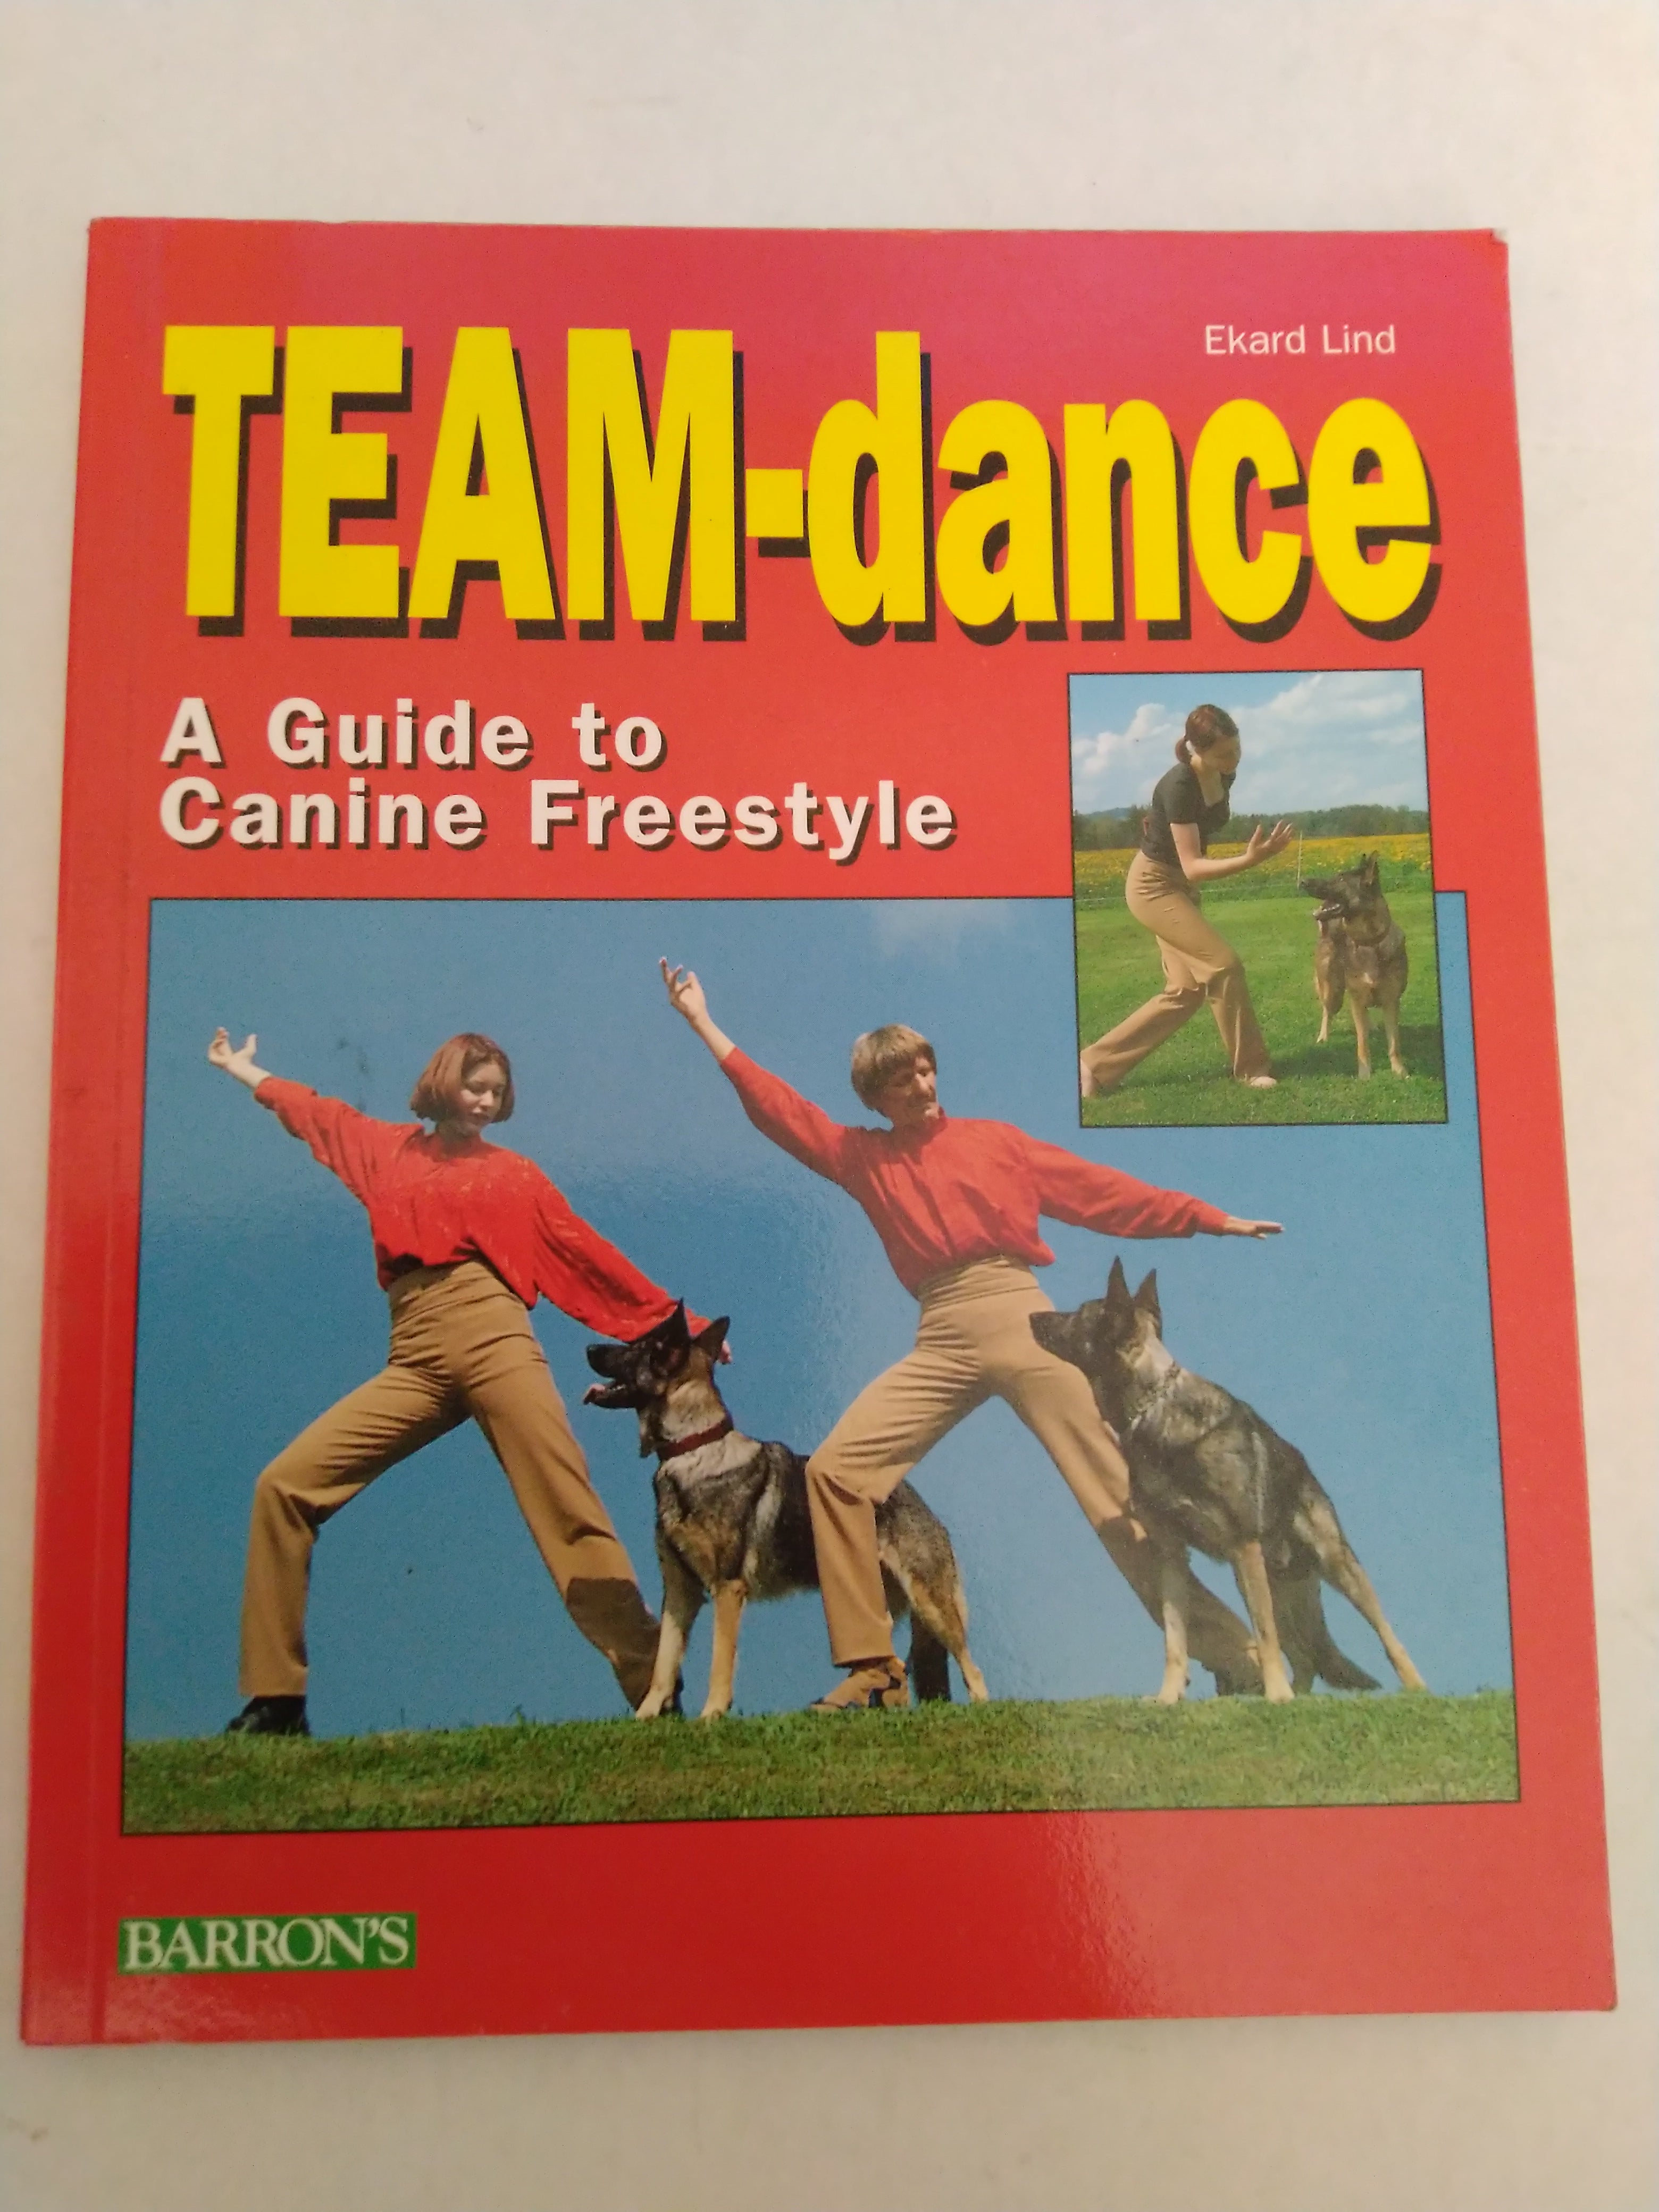 Team-Dance A Guide To Canine Freestyle by Ekard Lind